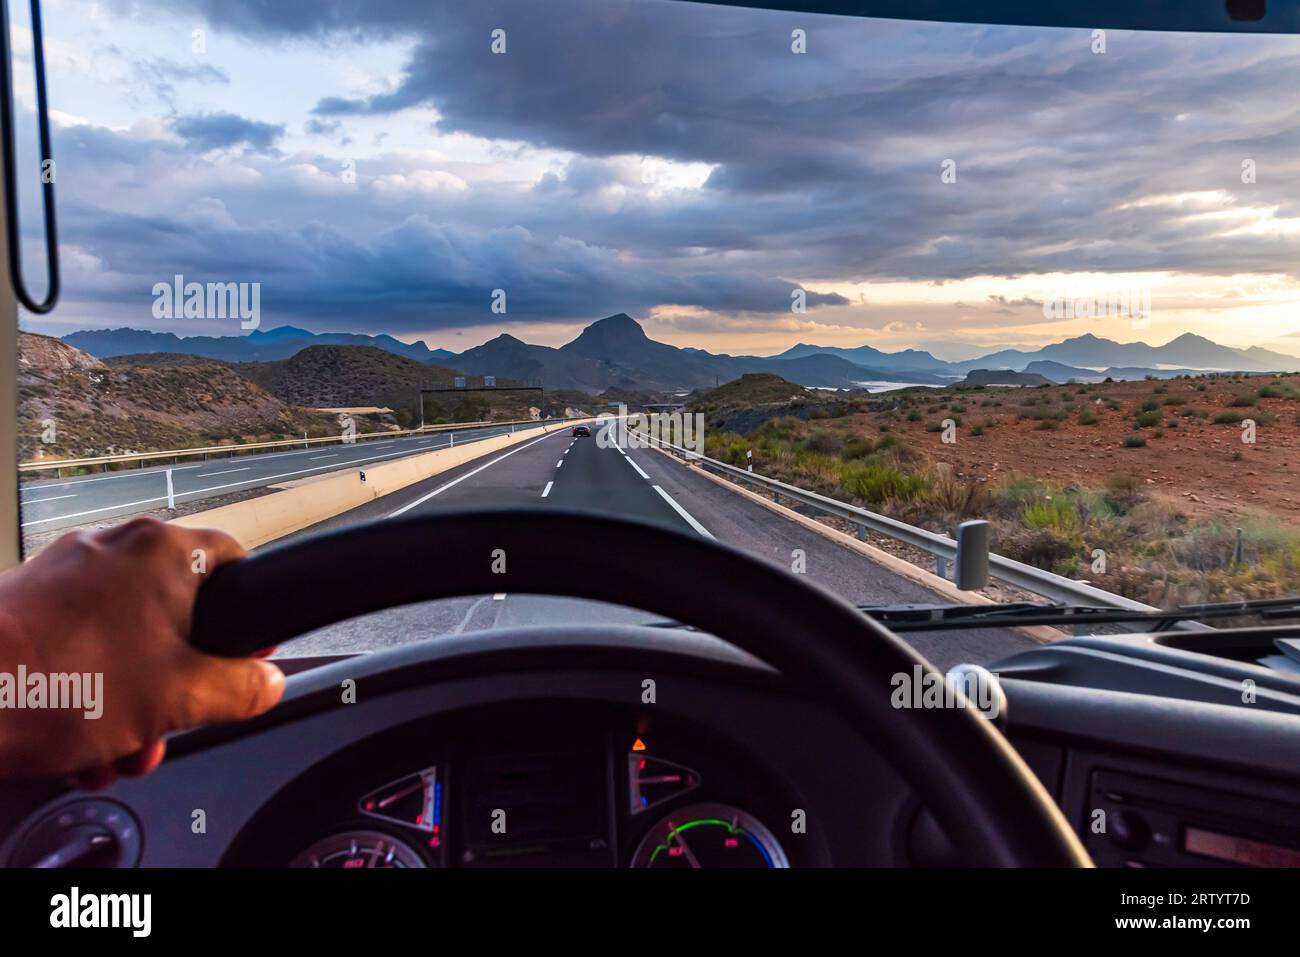 View from the driving position of a truck of the highway and a landscape of mountains in the background at dawn. Stock Photo